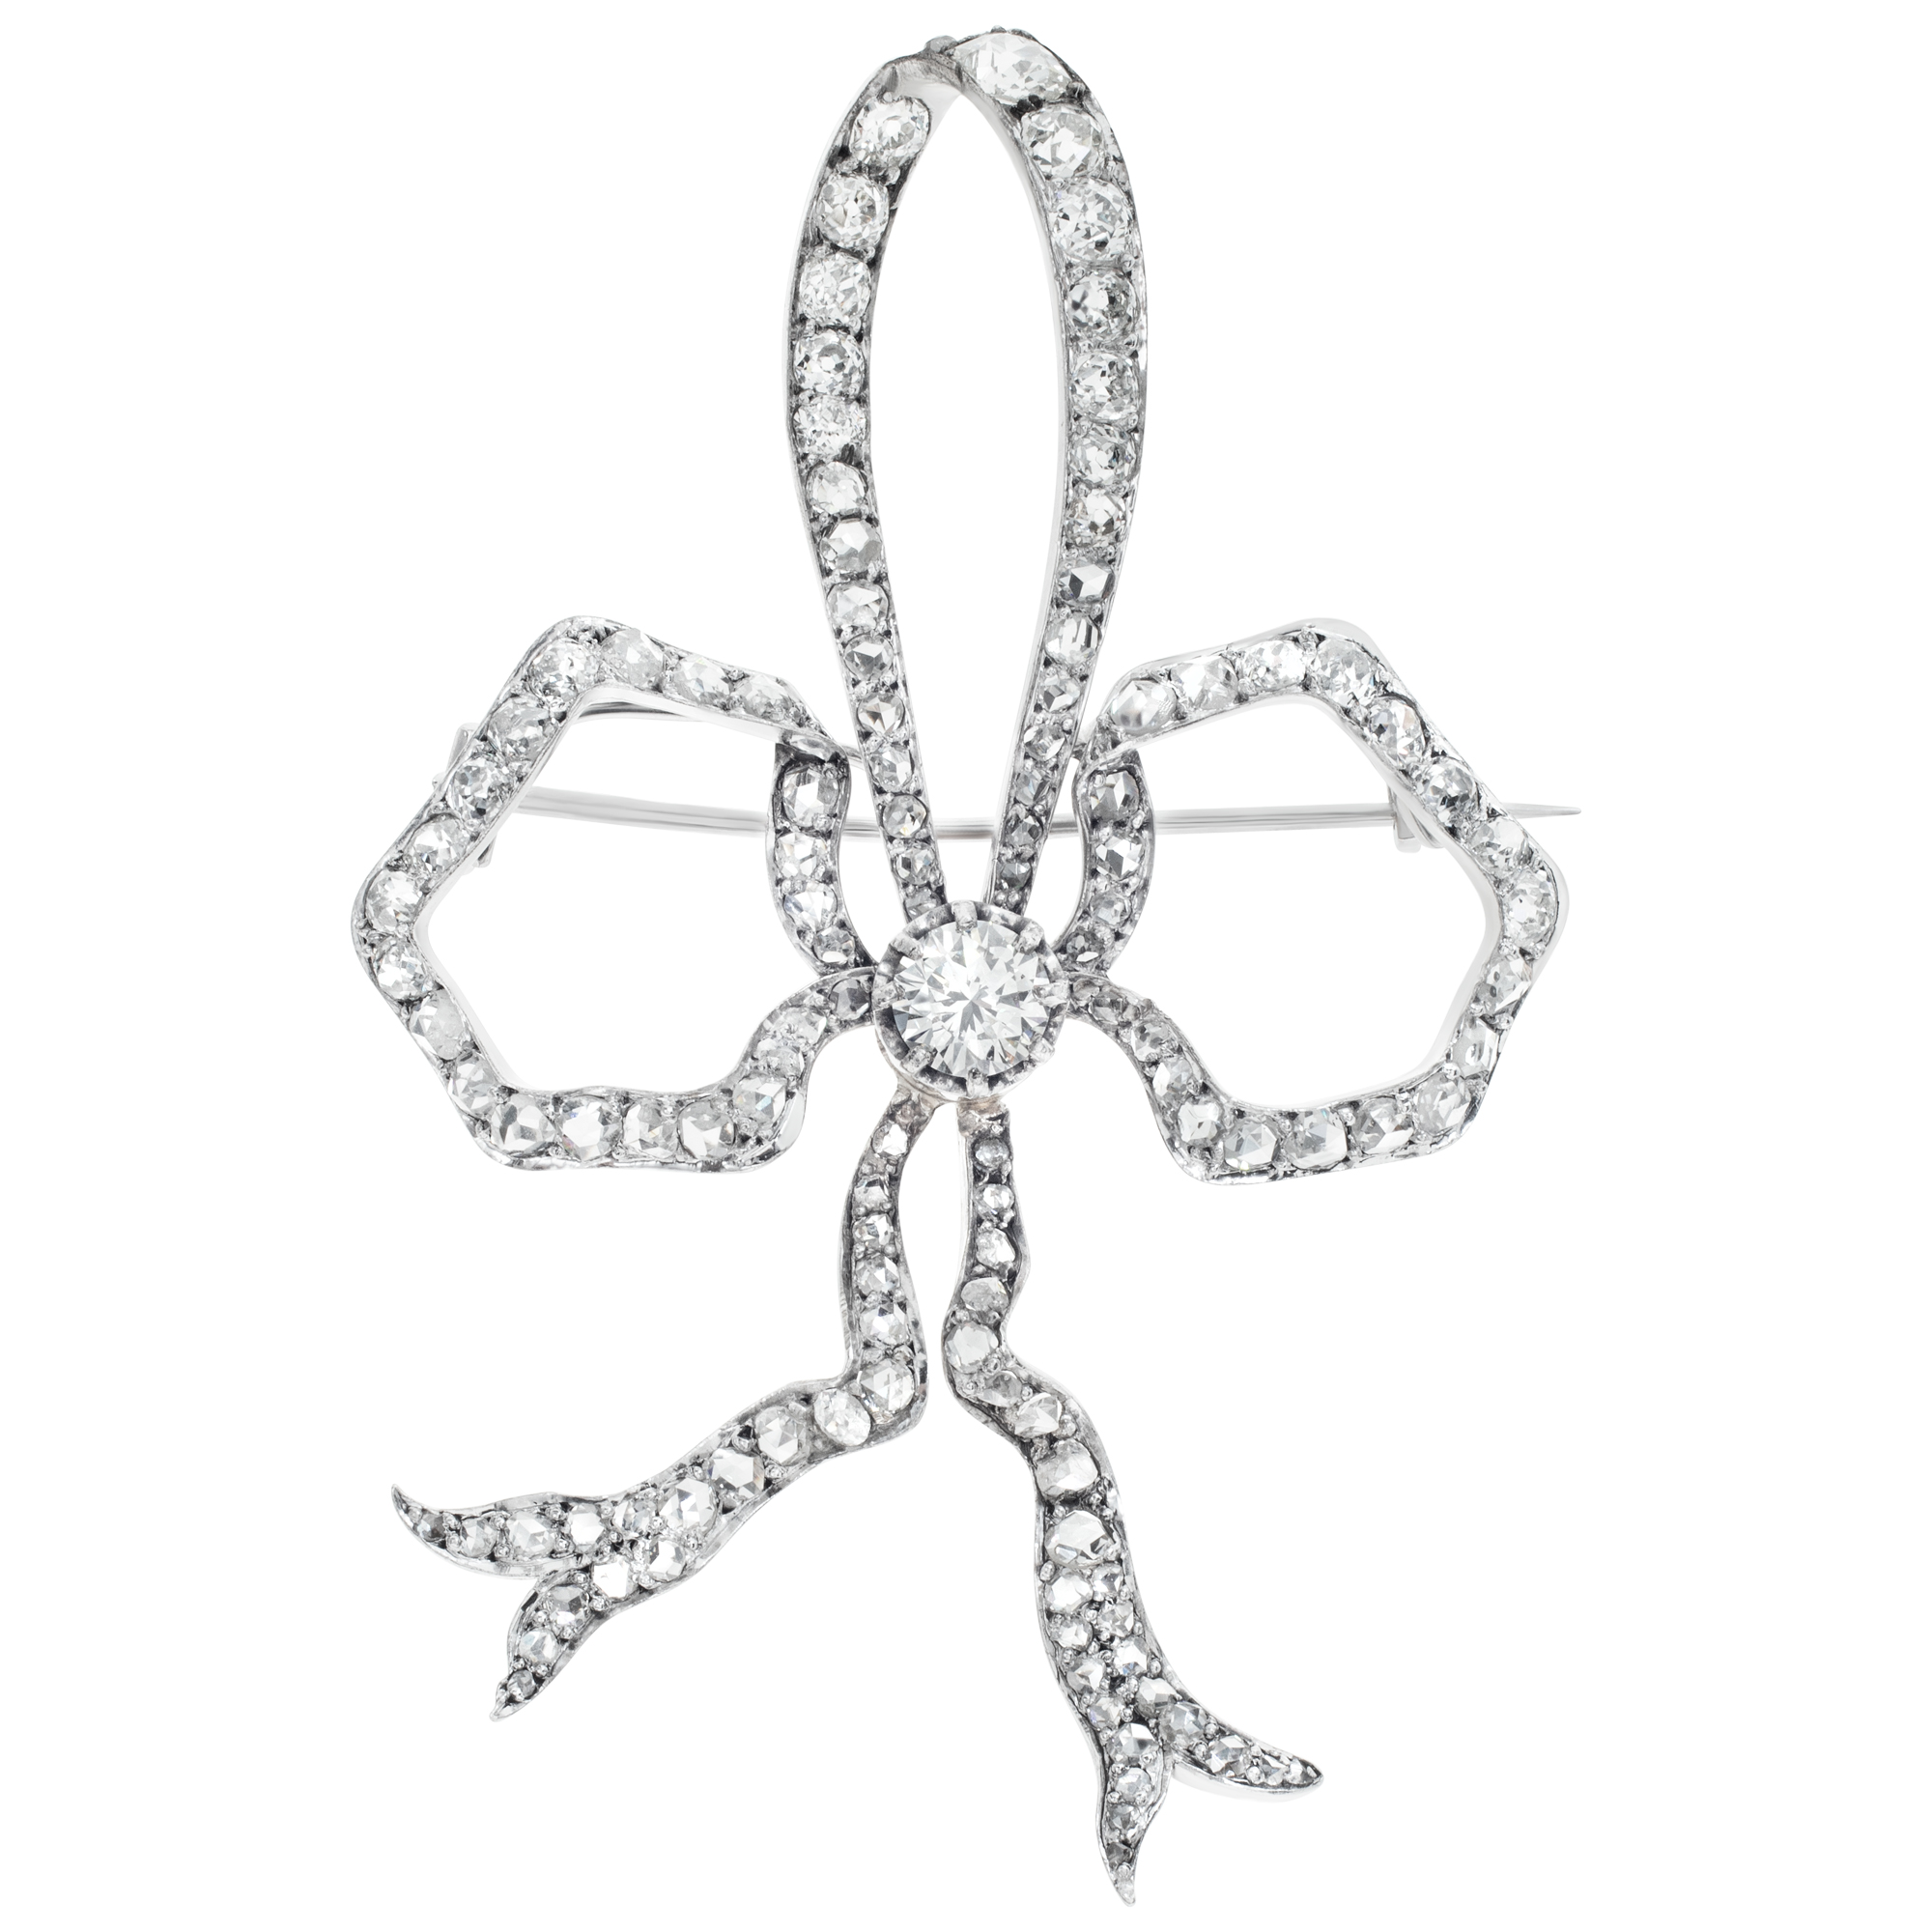 Diamond brooch in 18k white gold with 1 ct center rose cut diamond